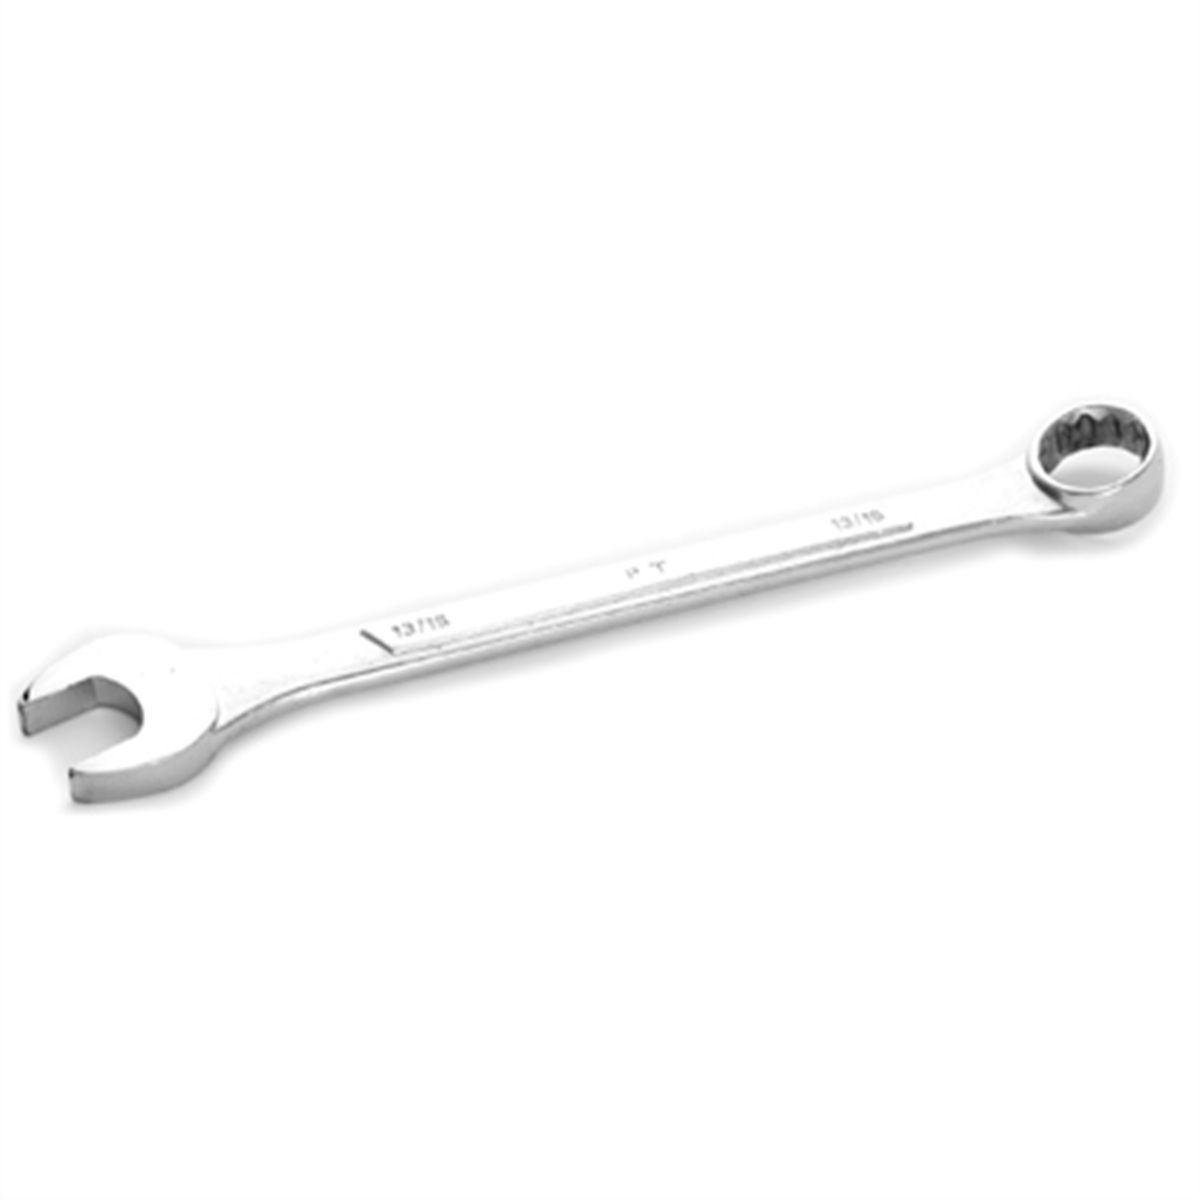 13/16" SAE Comb Wrench